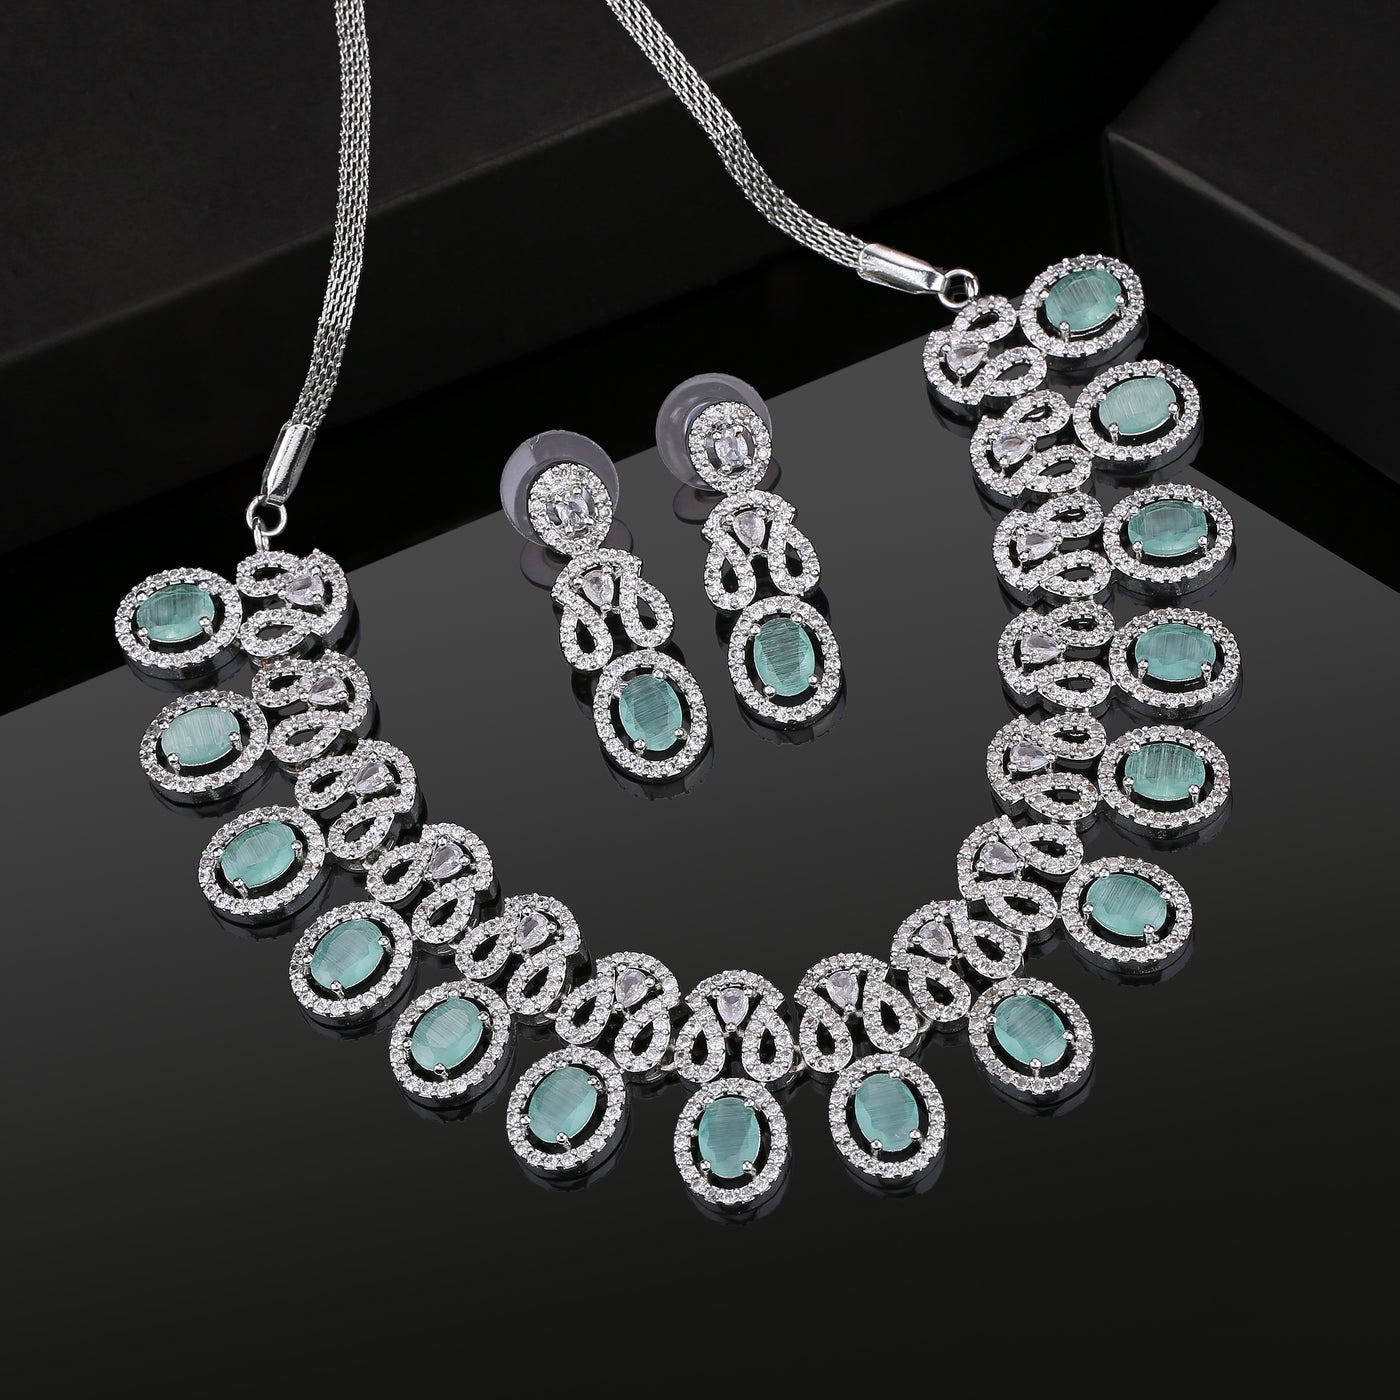 Estele Rhodium Plated CZ Fascinating Necklace Set with Mint Green Crystals for Women